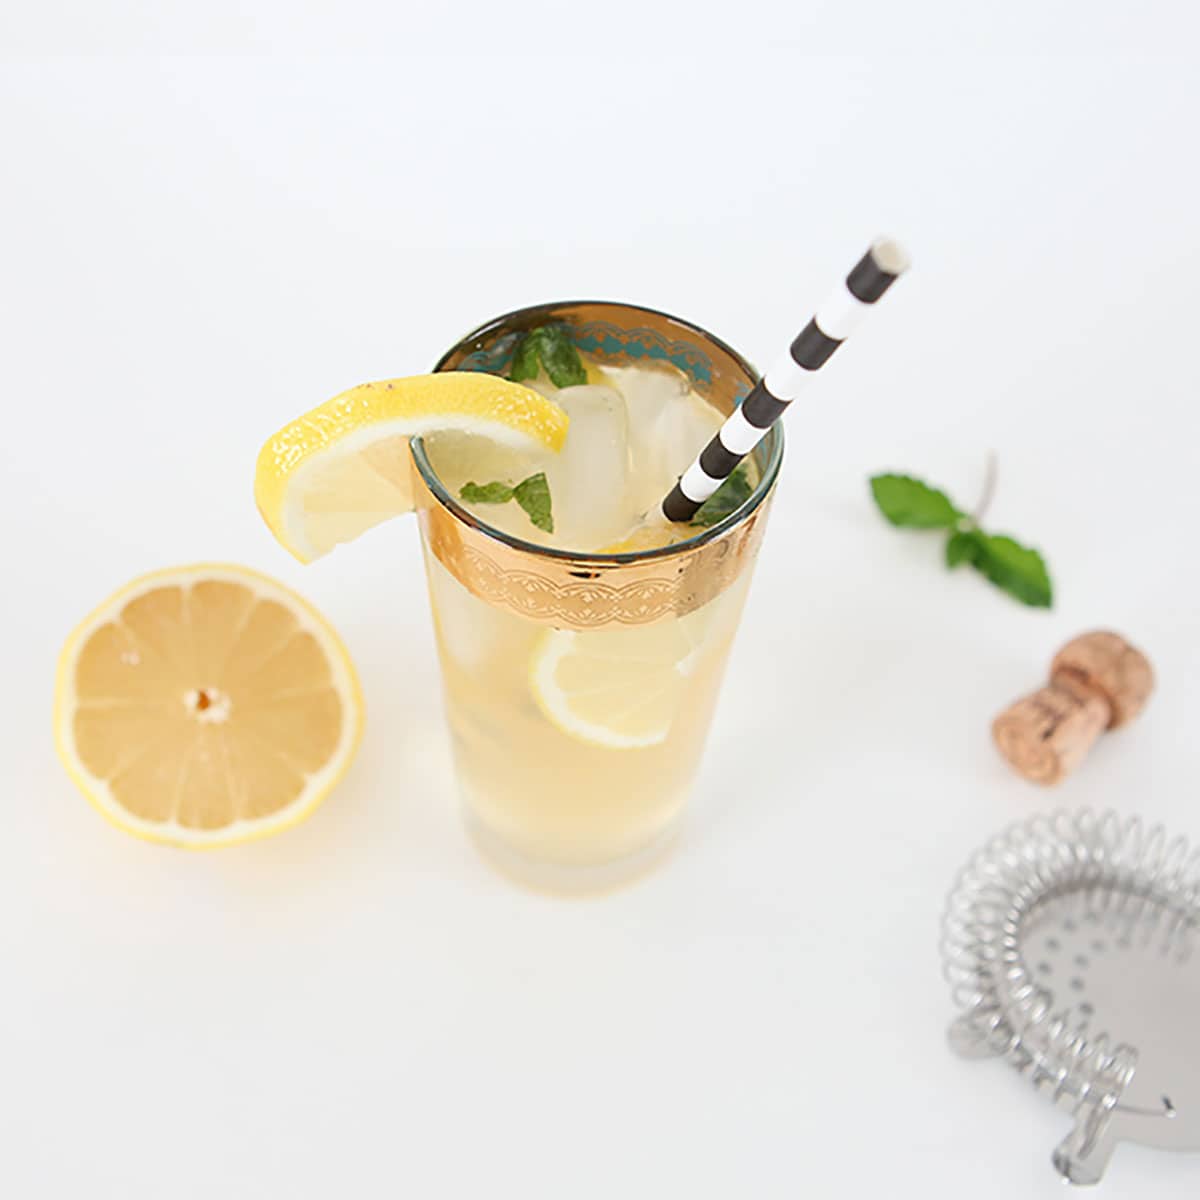 Champagne Smash Cocktail Recipe perfect drink for New Year's Eve all you need is gin, Lillet Rose and champagne!